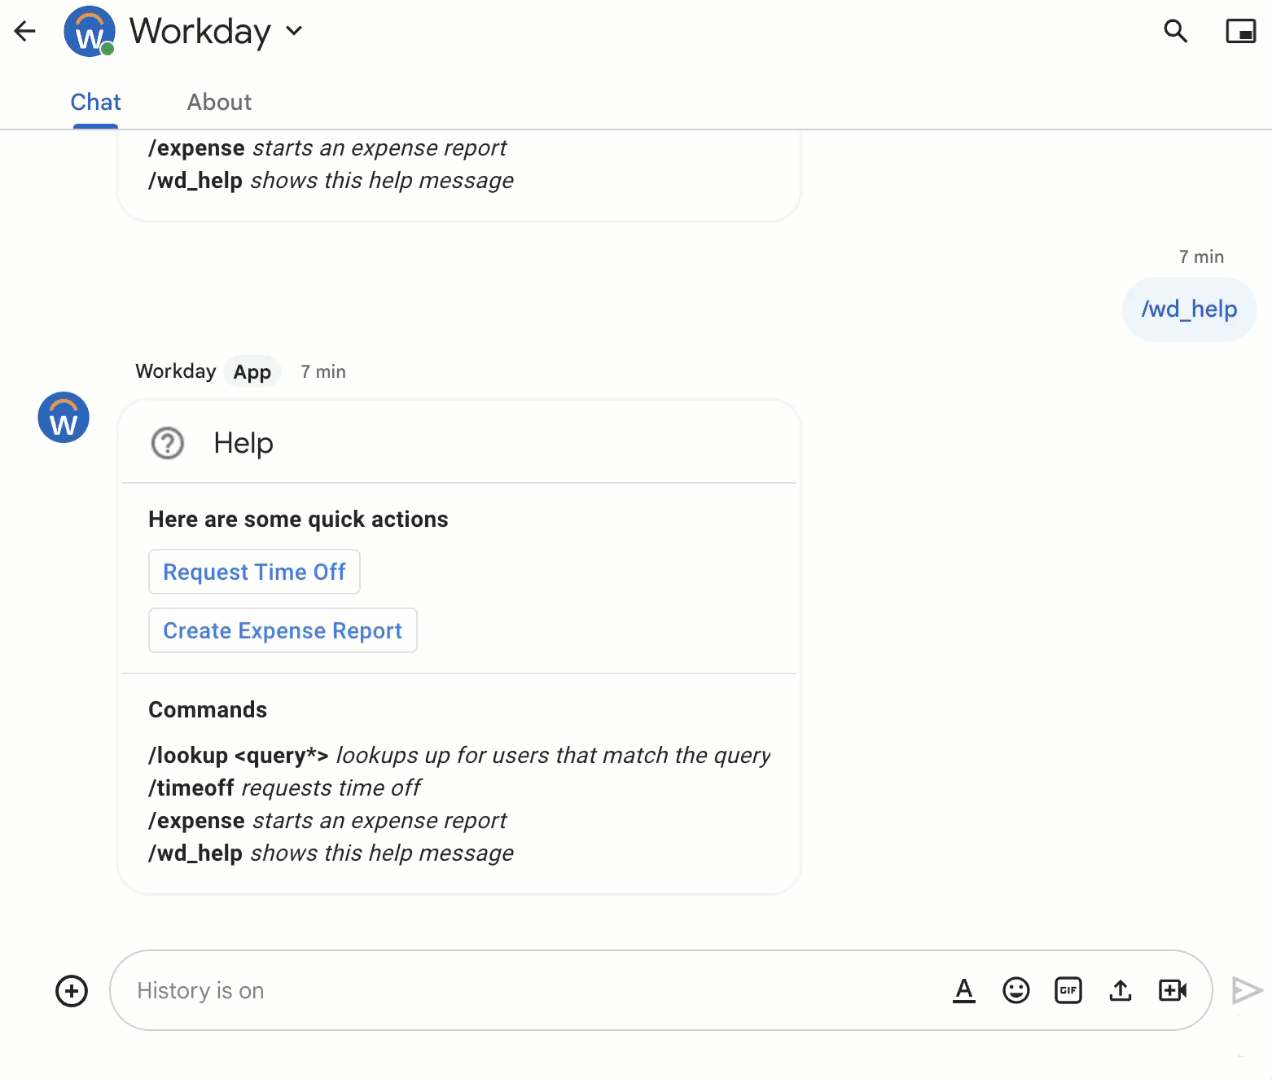 workday-app-chat